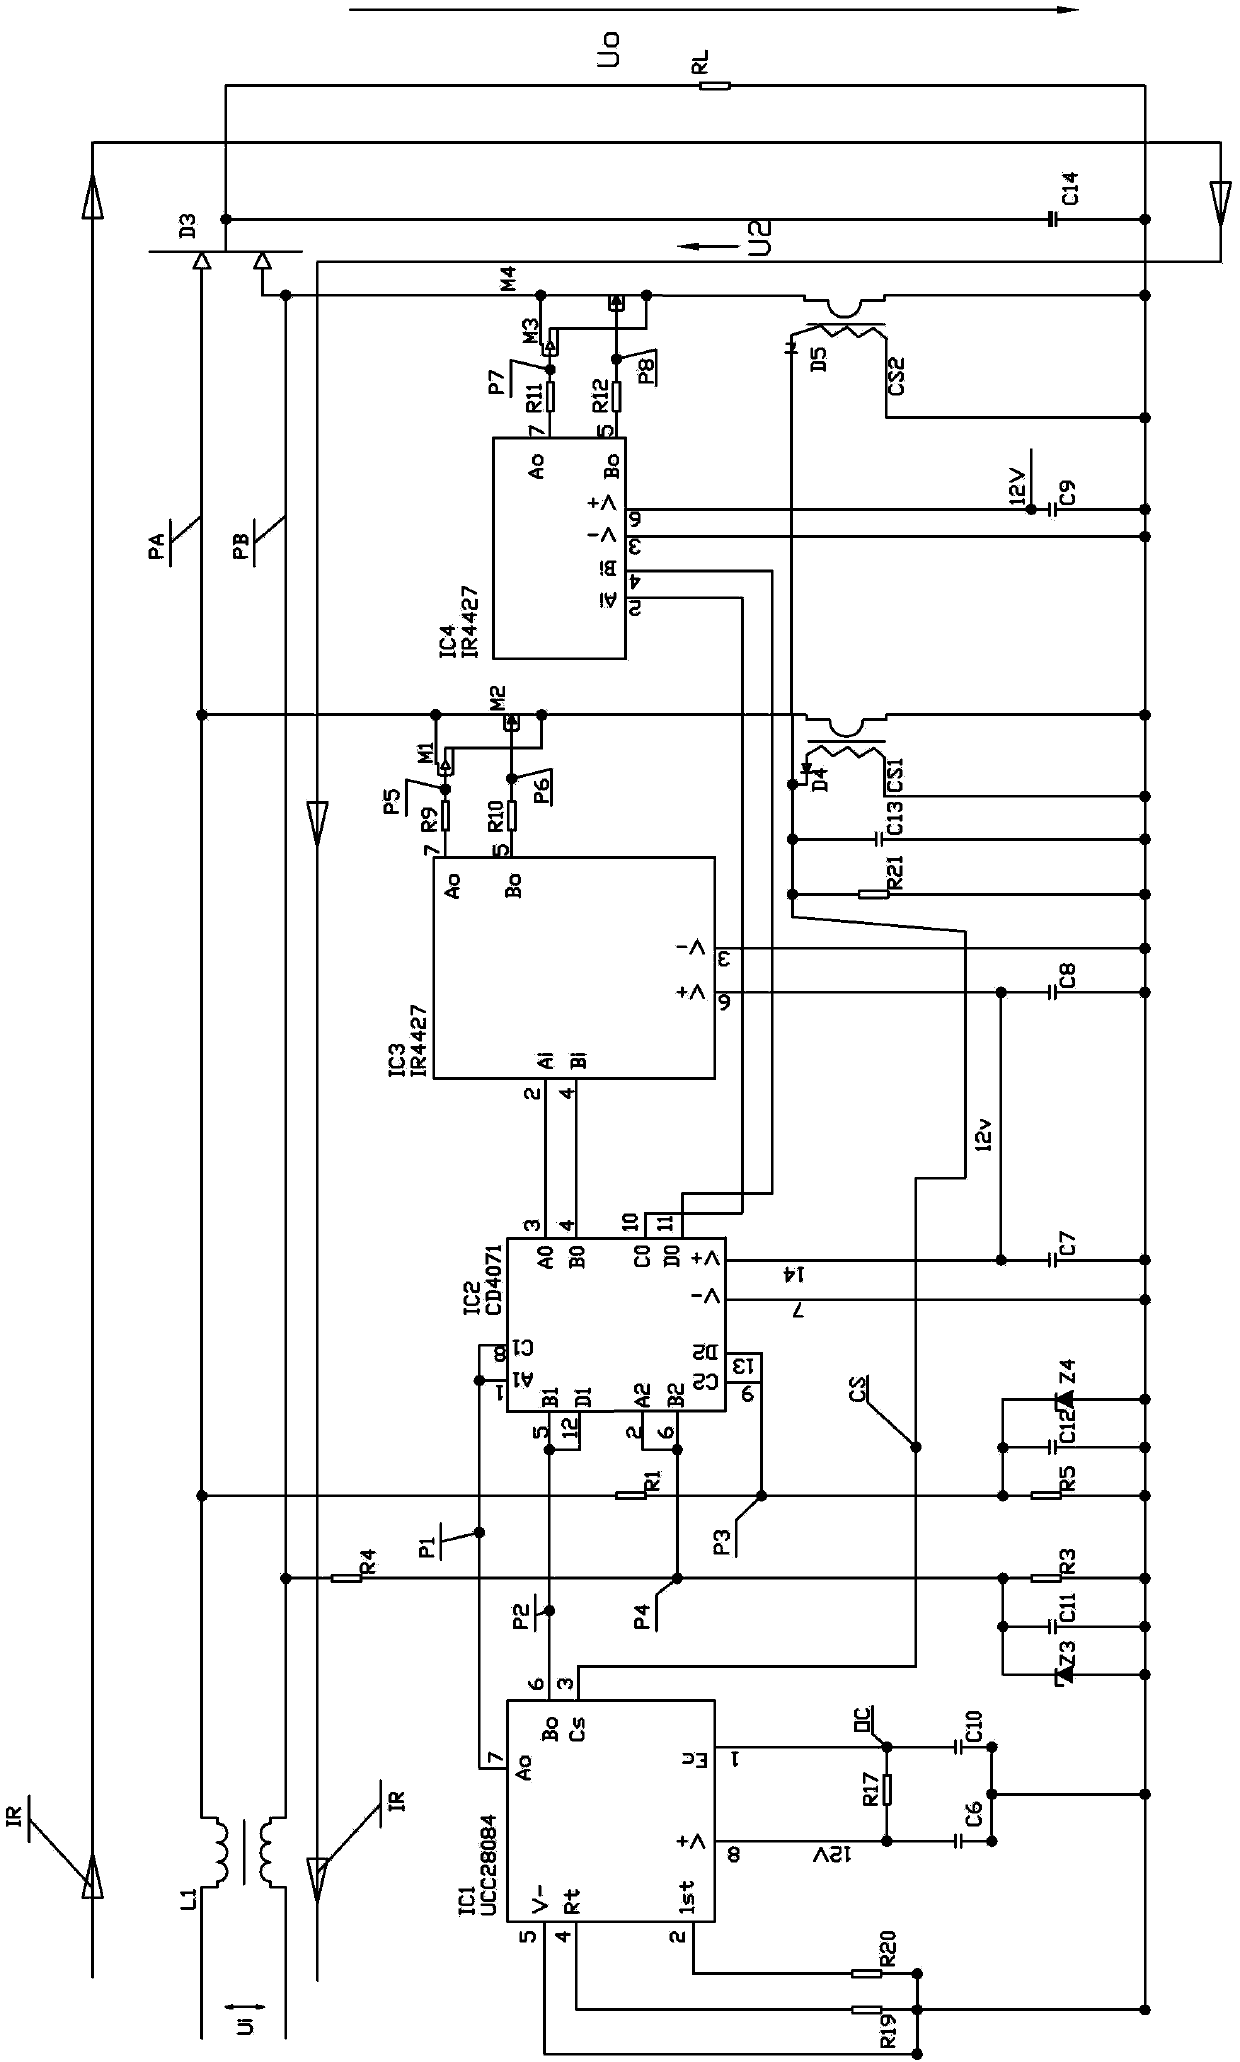 VMOS switching control circuit with robustness